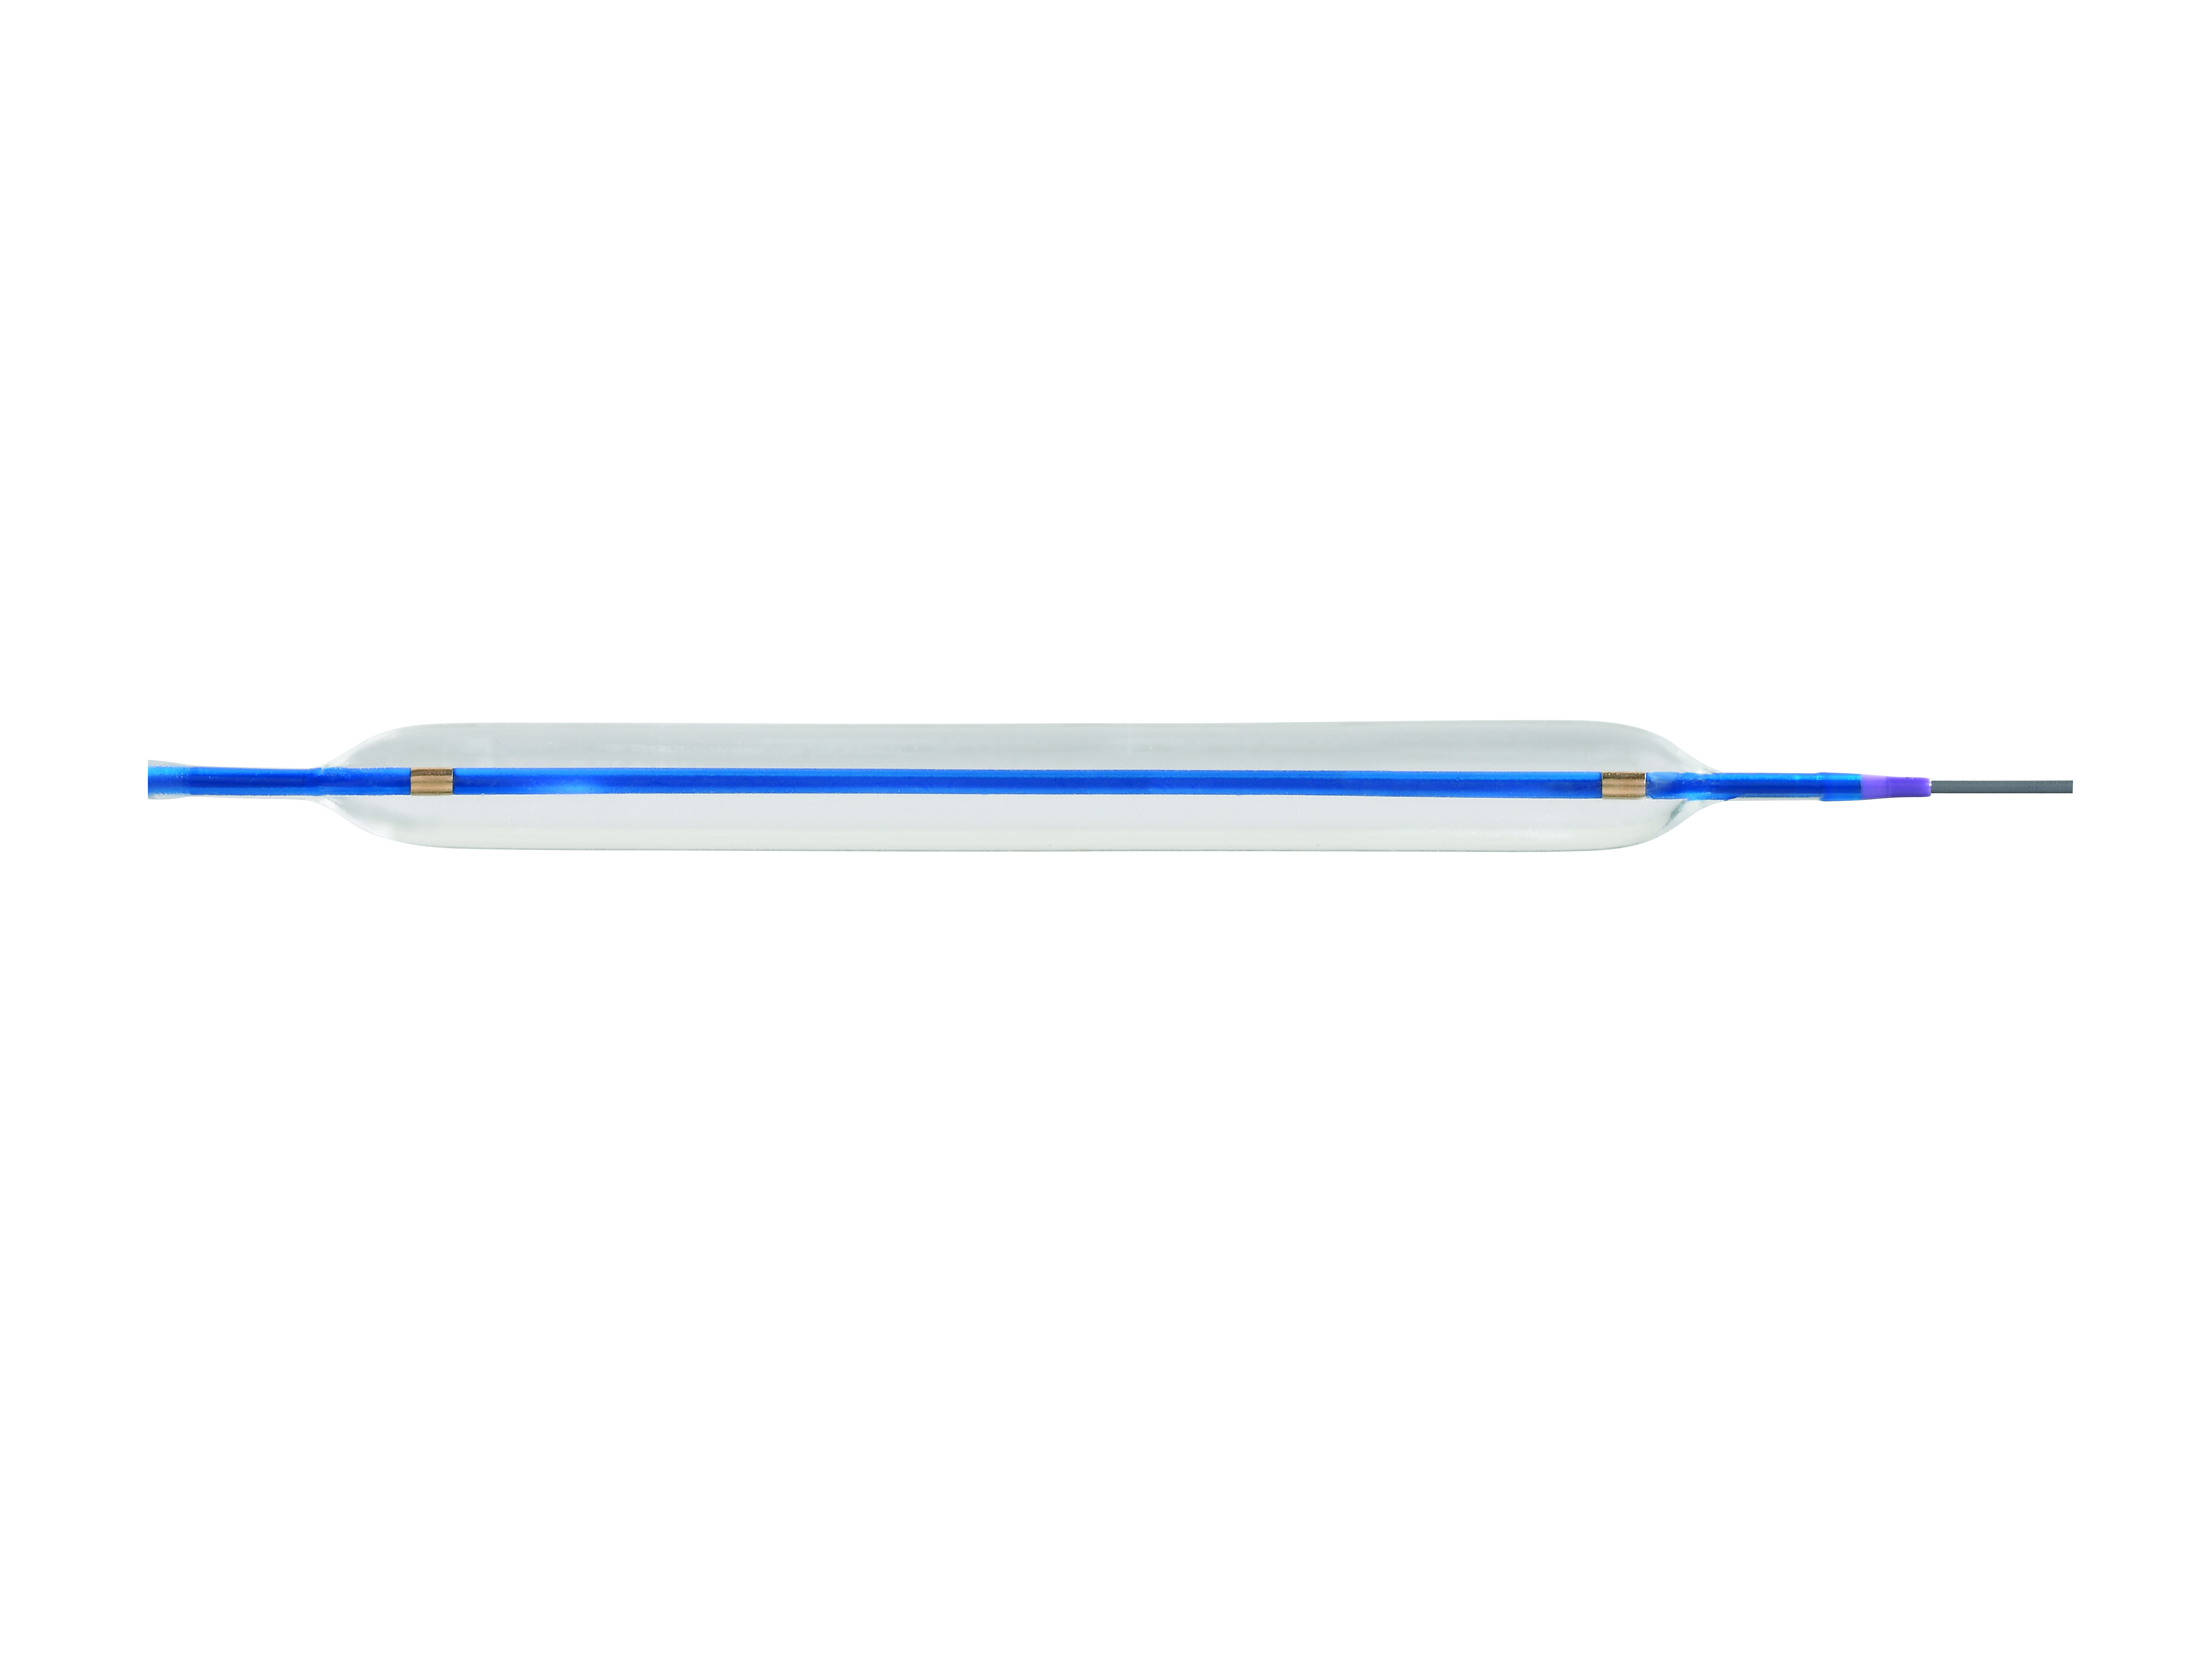 The Sterling Monorail Balloon Dilatation Catheter from Boston Scientific. 2013 Boston Scientific Corporation or its affiliates. All rights reserved. Used with permission of Boston Scientific Corporation.